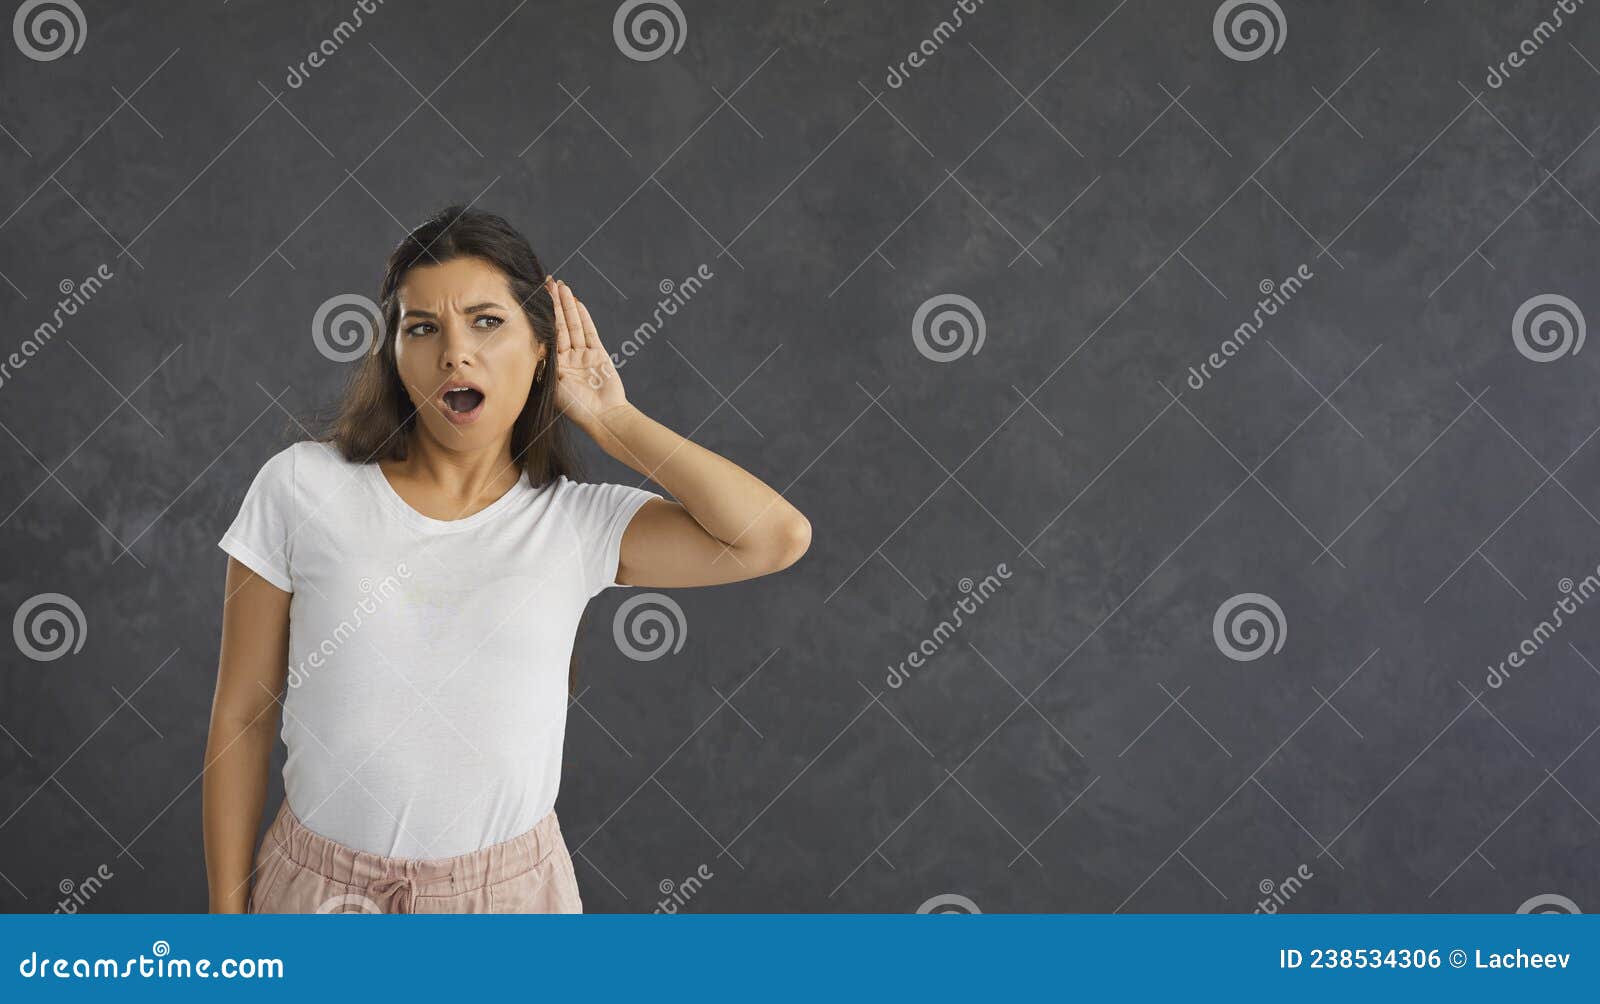 Curious Woman With A Shocked Expression Holds Her Hand Near Her Ear